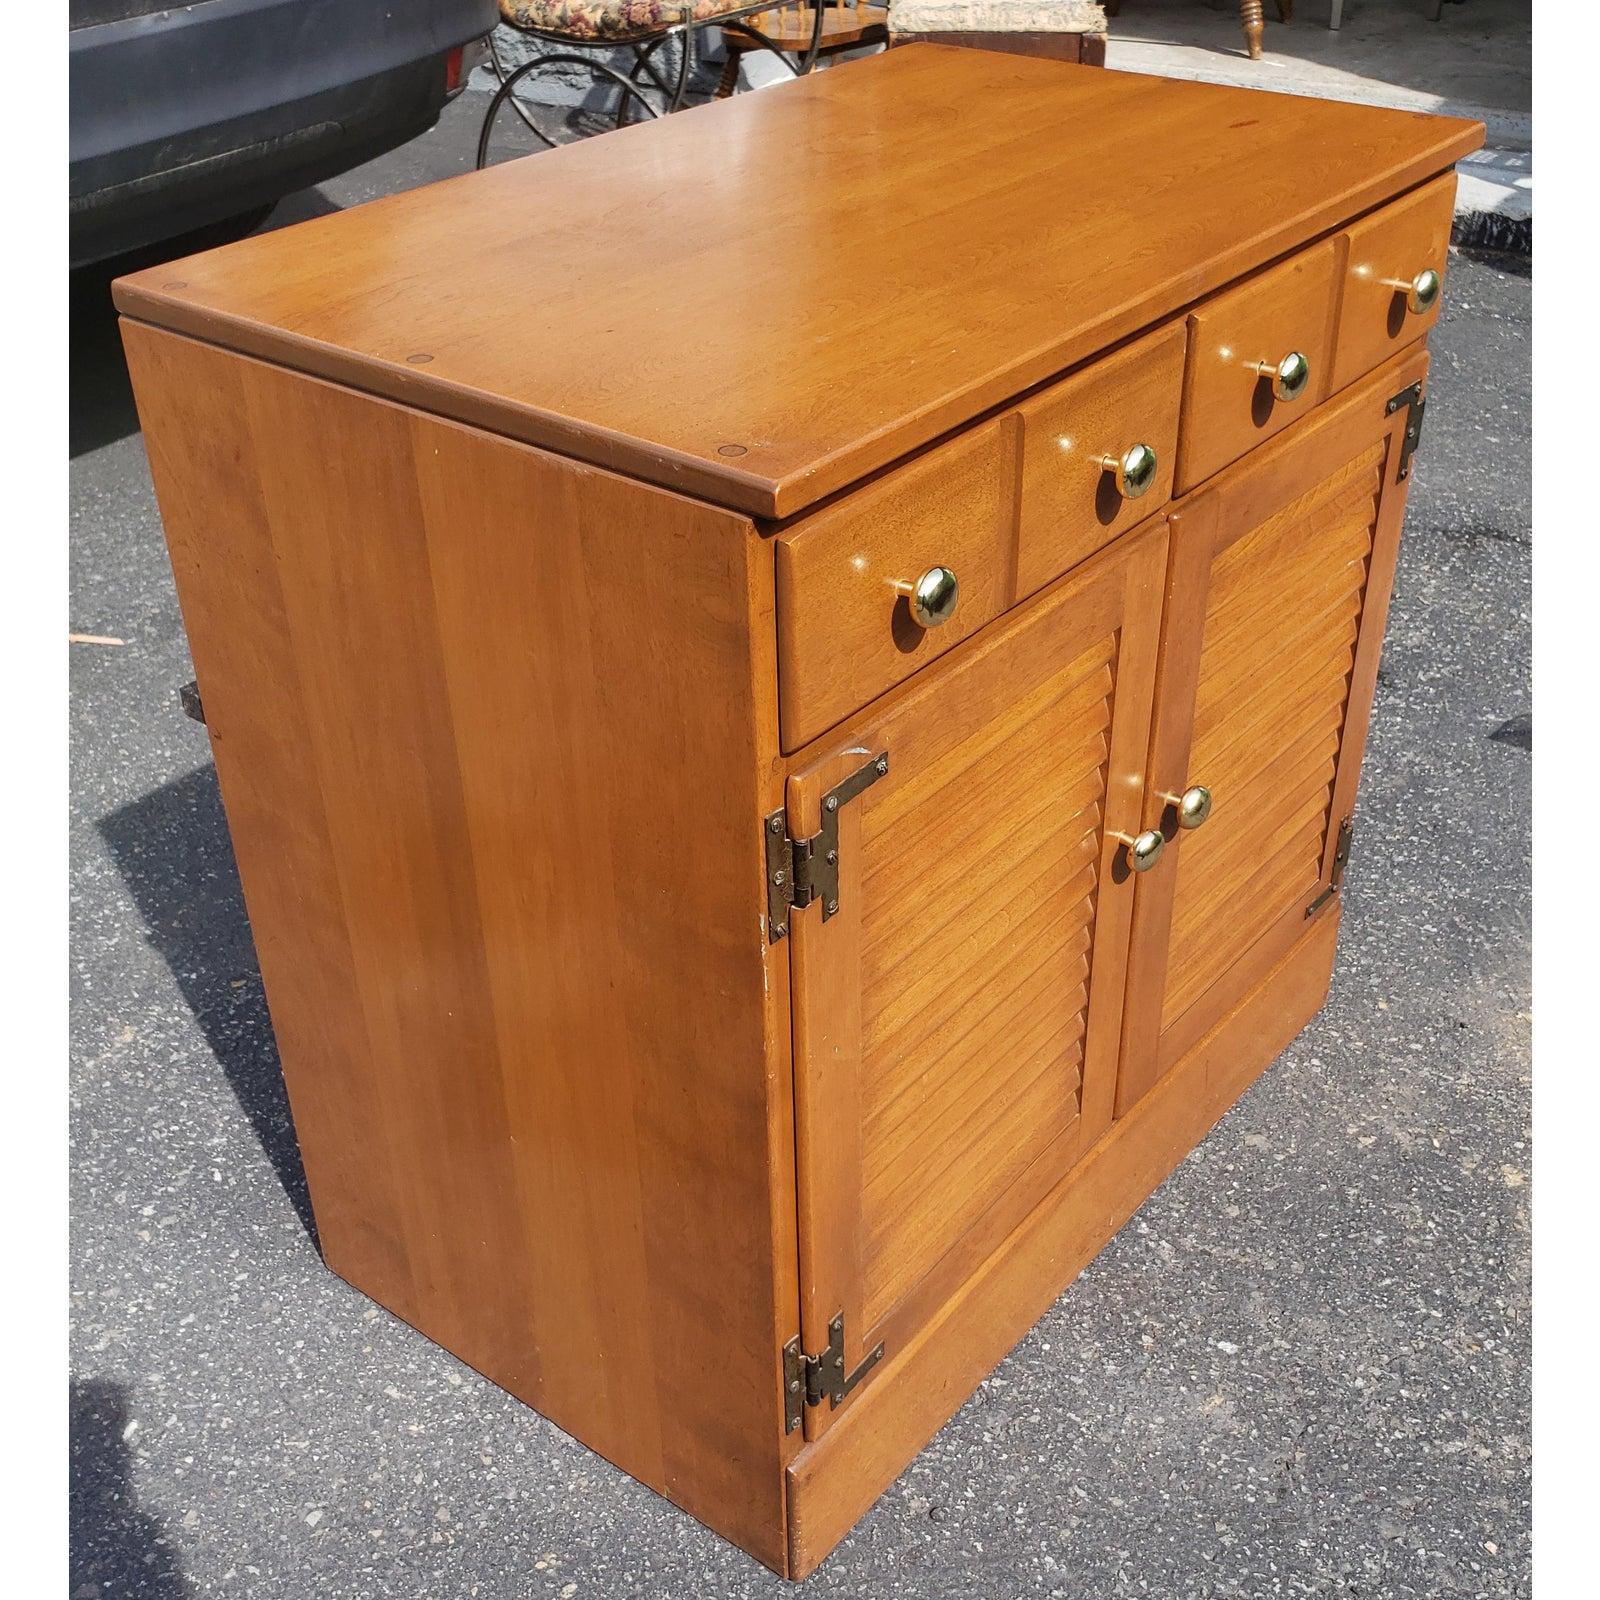 Ethan Allen Baumritter cabinet. Made of solid maple. In good condition. 
Measures: Cabinet. 30 W x 17 D x 30 H.